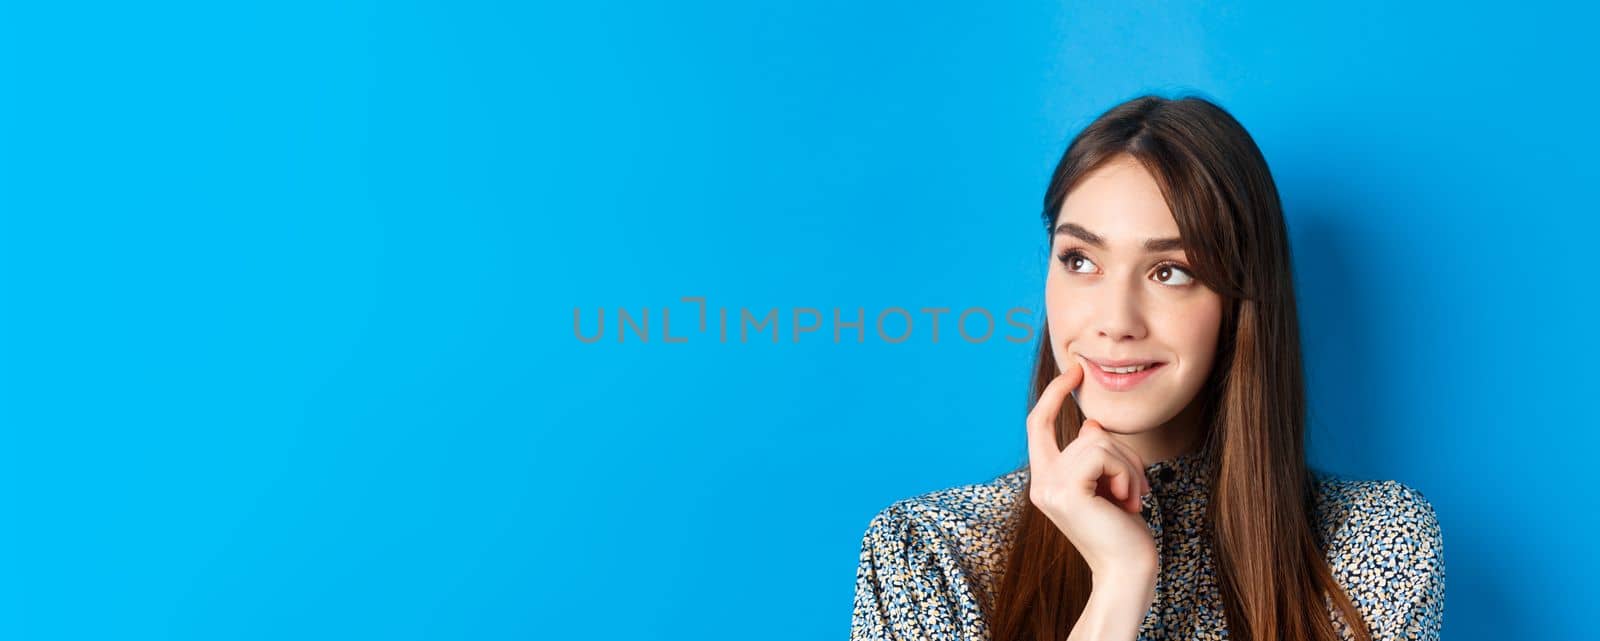 Interesting. Pensive young girl looking aside at logo and smiling, touching lip thoughtful, have an idea, standing on blue background.